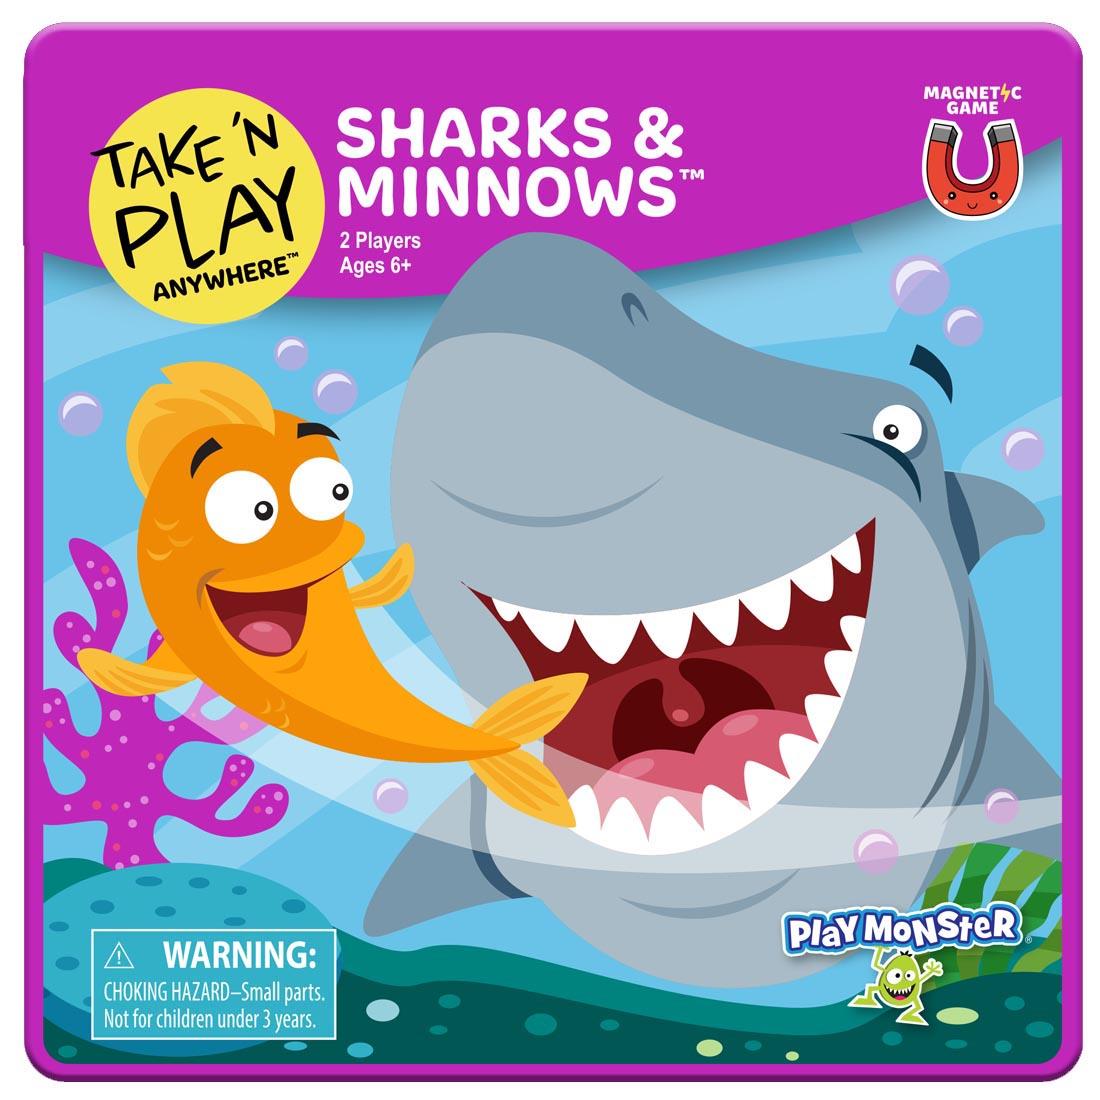 Take 'N Play Anywhere Magnetic Sharks & Minnows Game